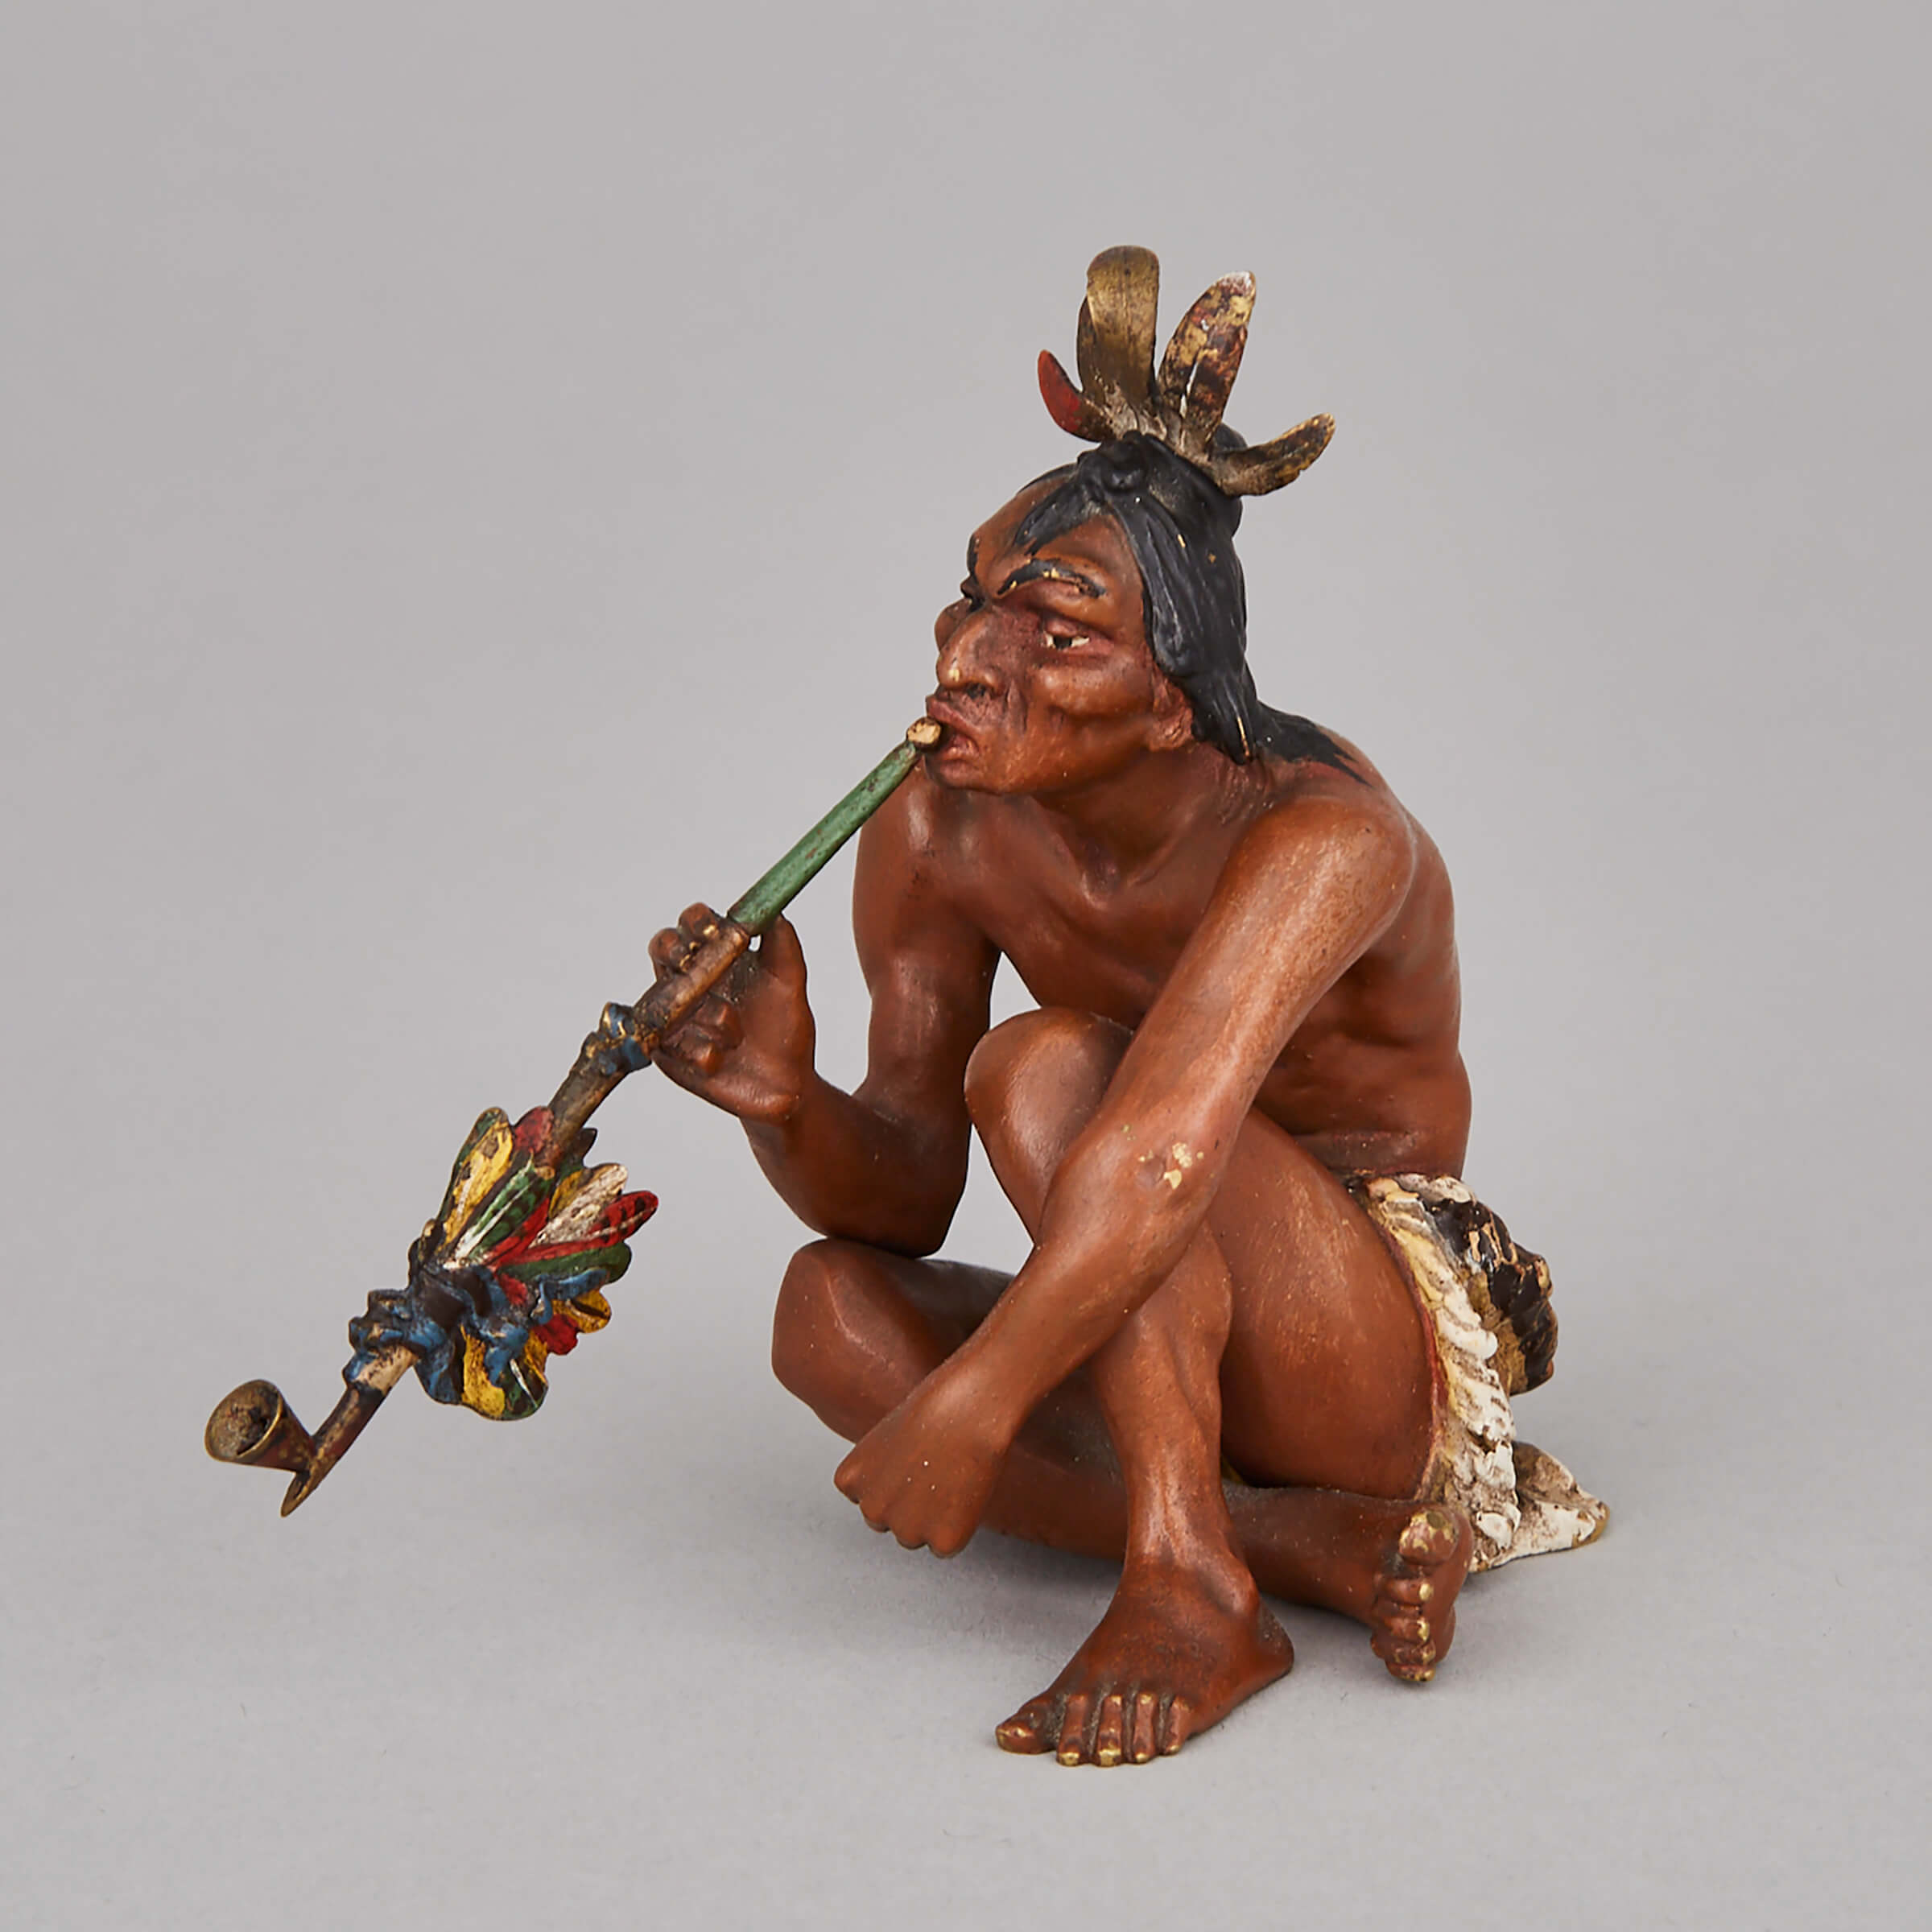 Franz Bergman Cold Painted Bronze Figure of a Native North American, early 20th century